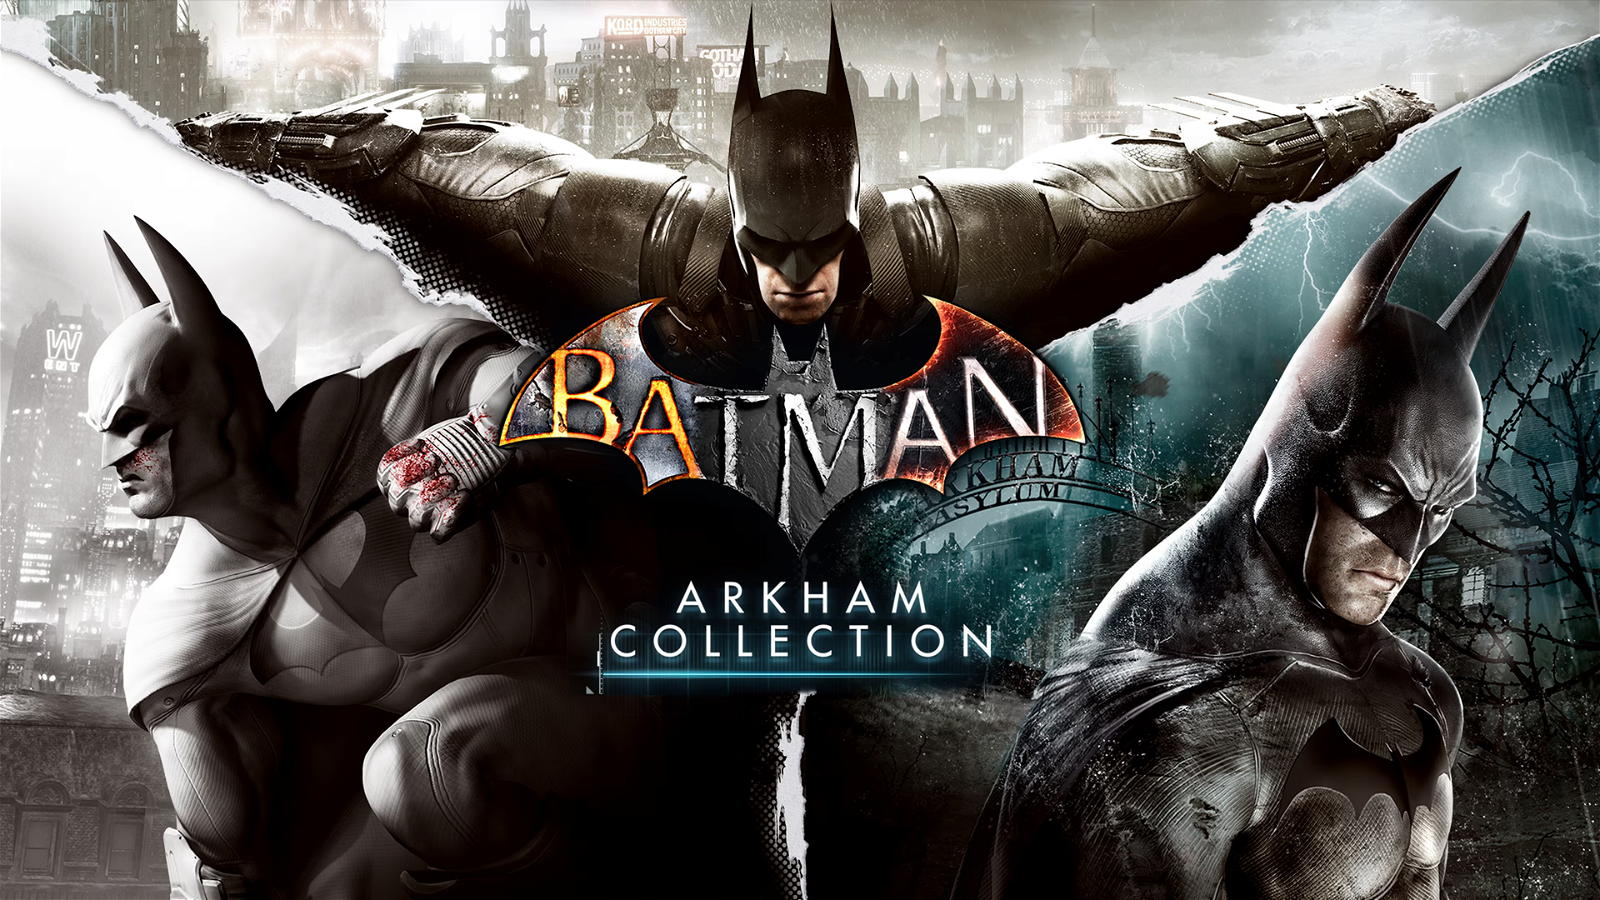 The Arkham Trilogy (titled Arkham Collection) released on PS4, Xbox One and PC.